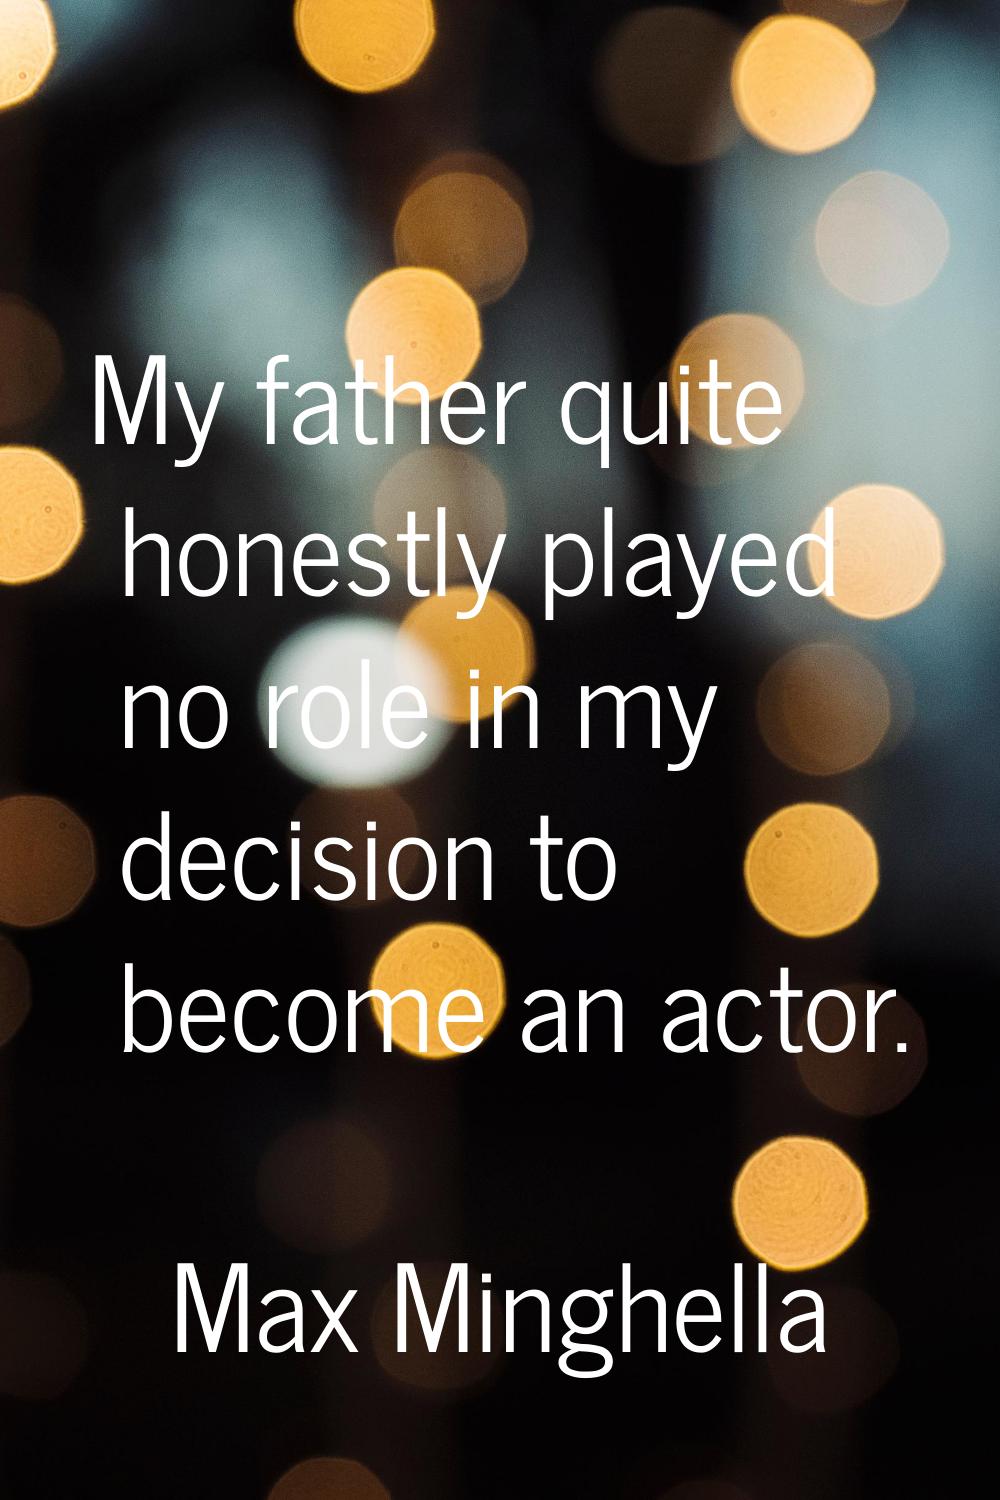 My father quite honestly played no role in my decision to become an actor.